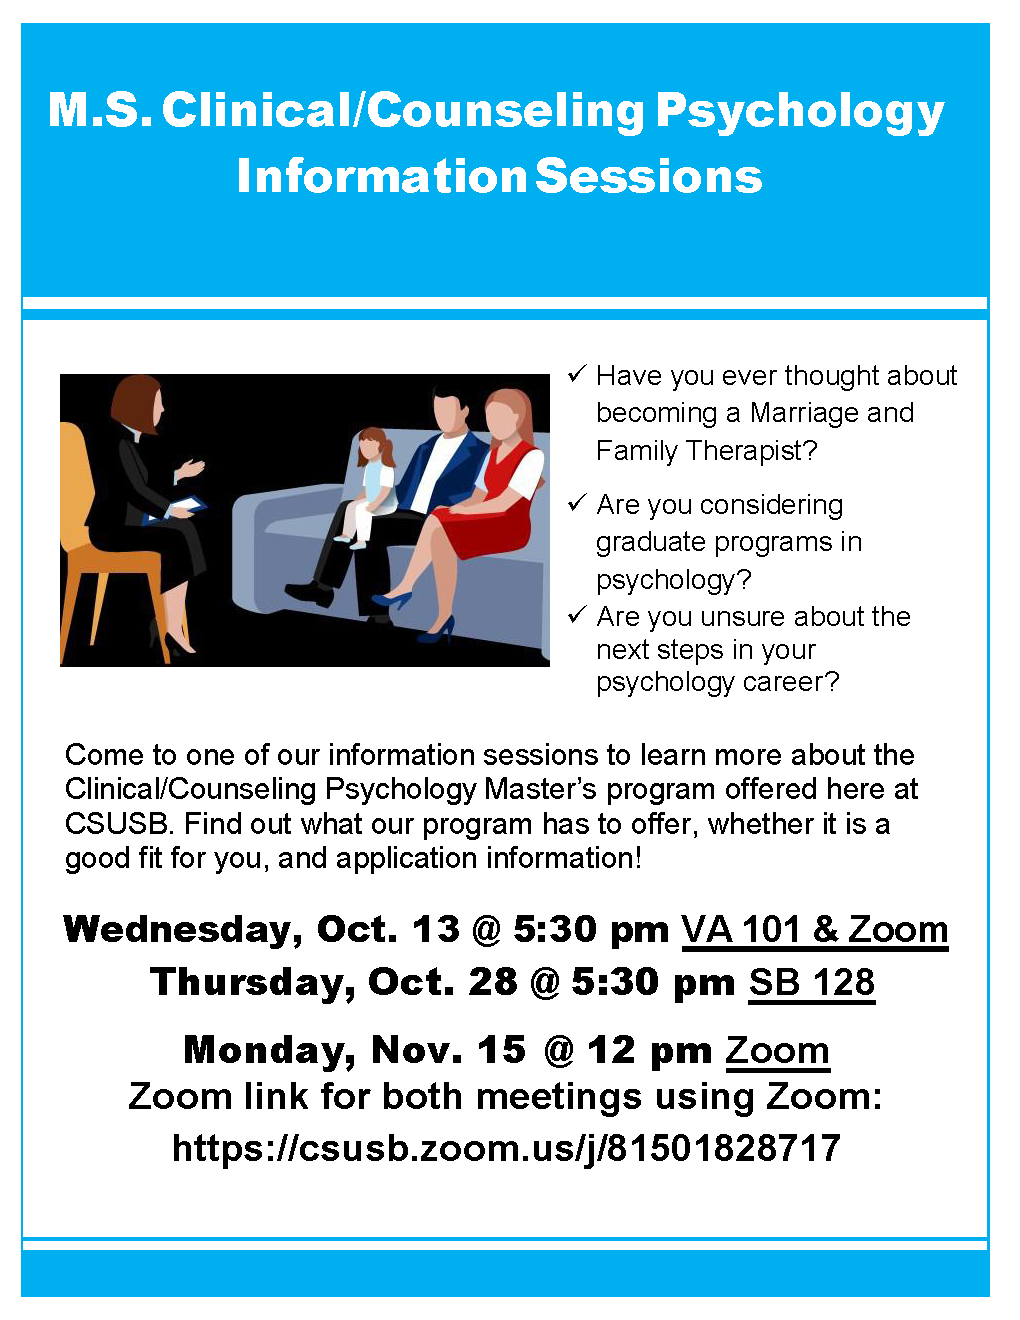 Upcoming MSCC Information Sessions